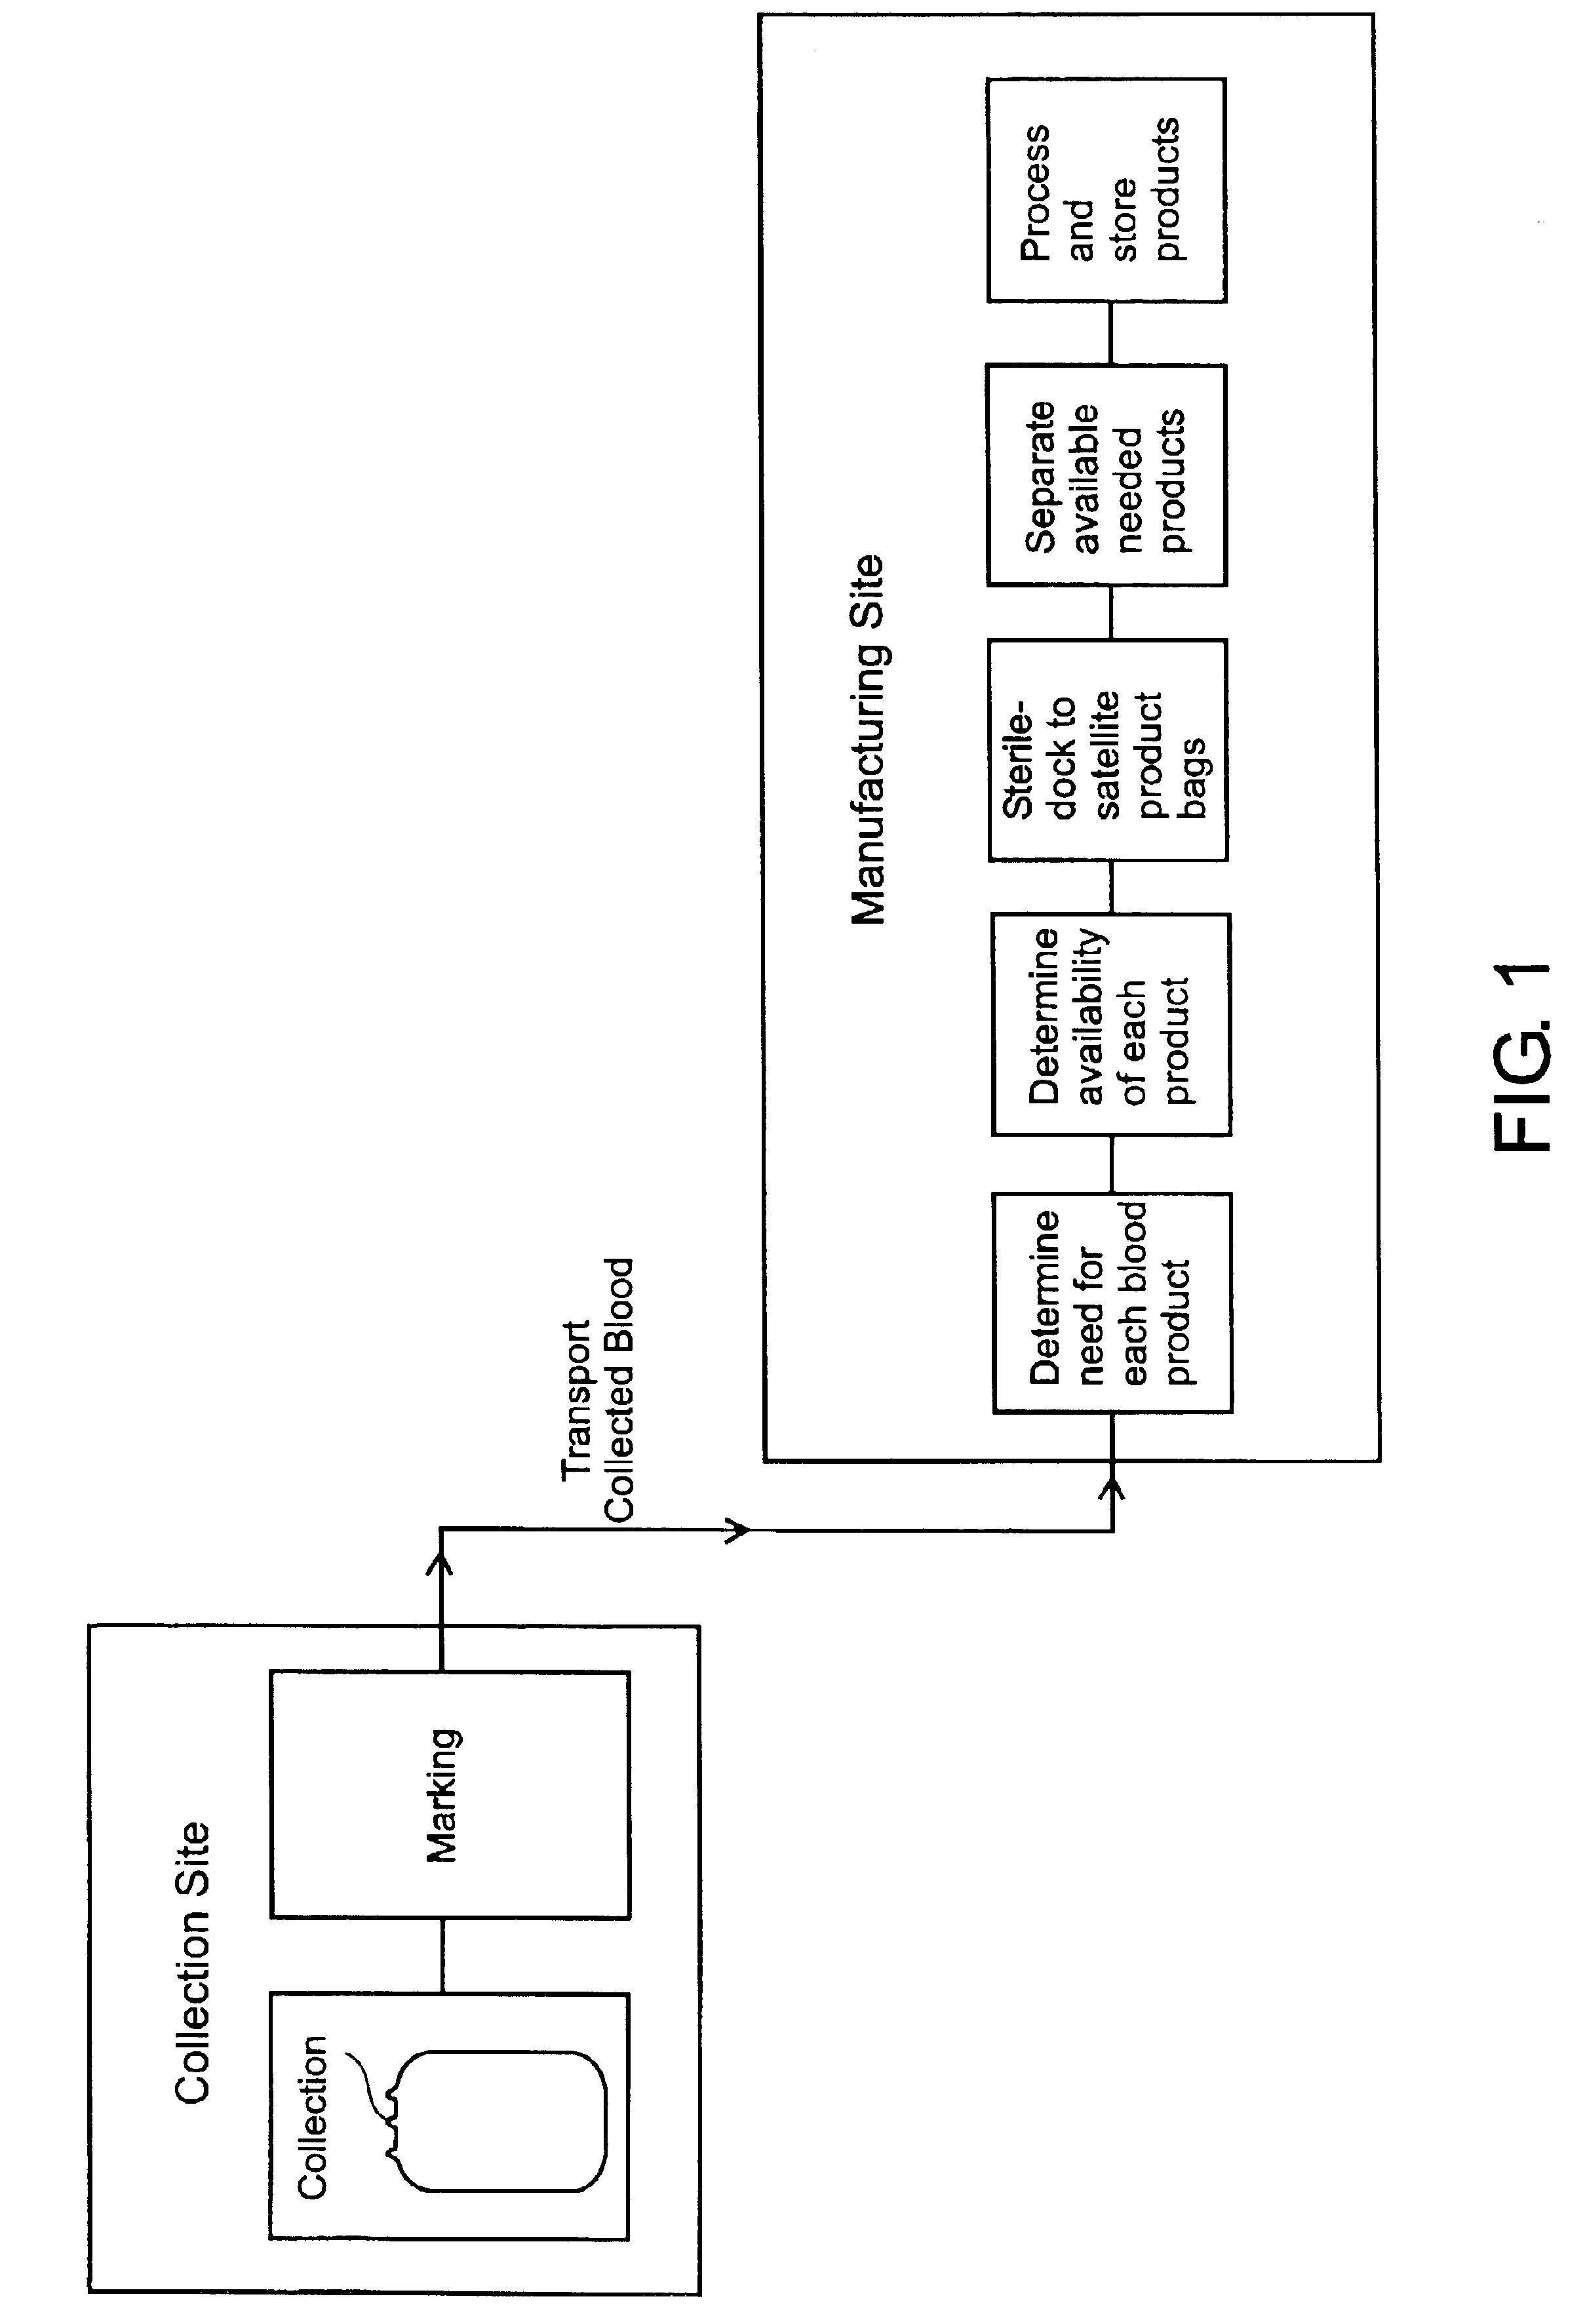 Whole blood collection and processing method